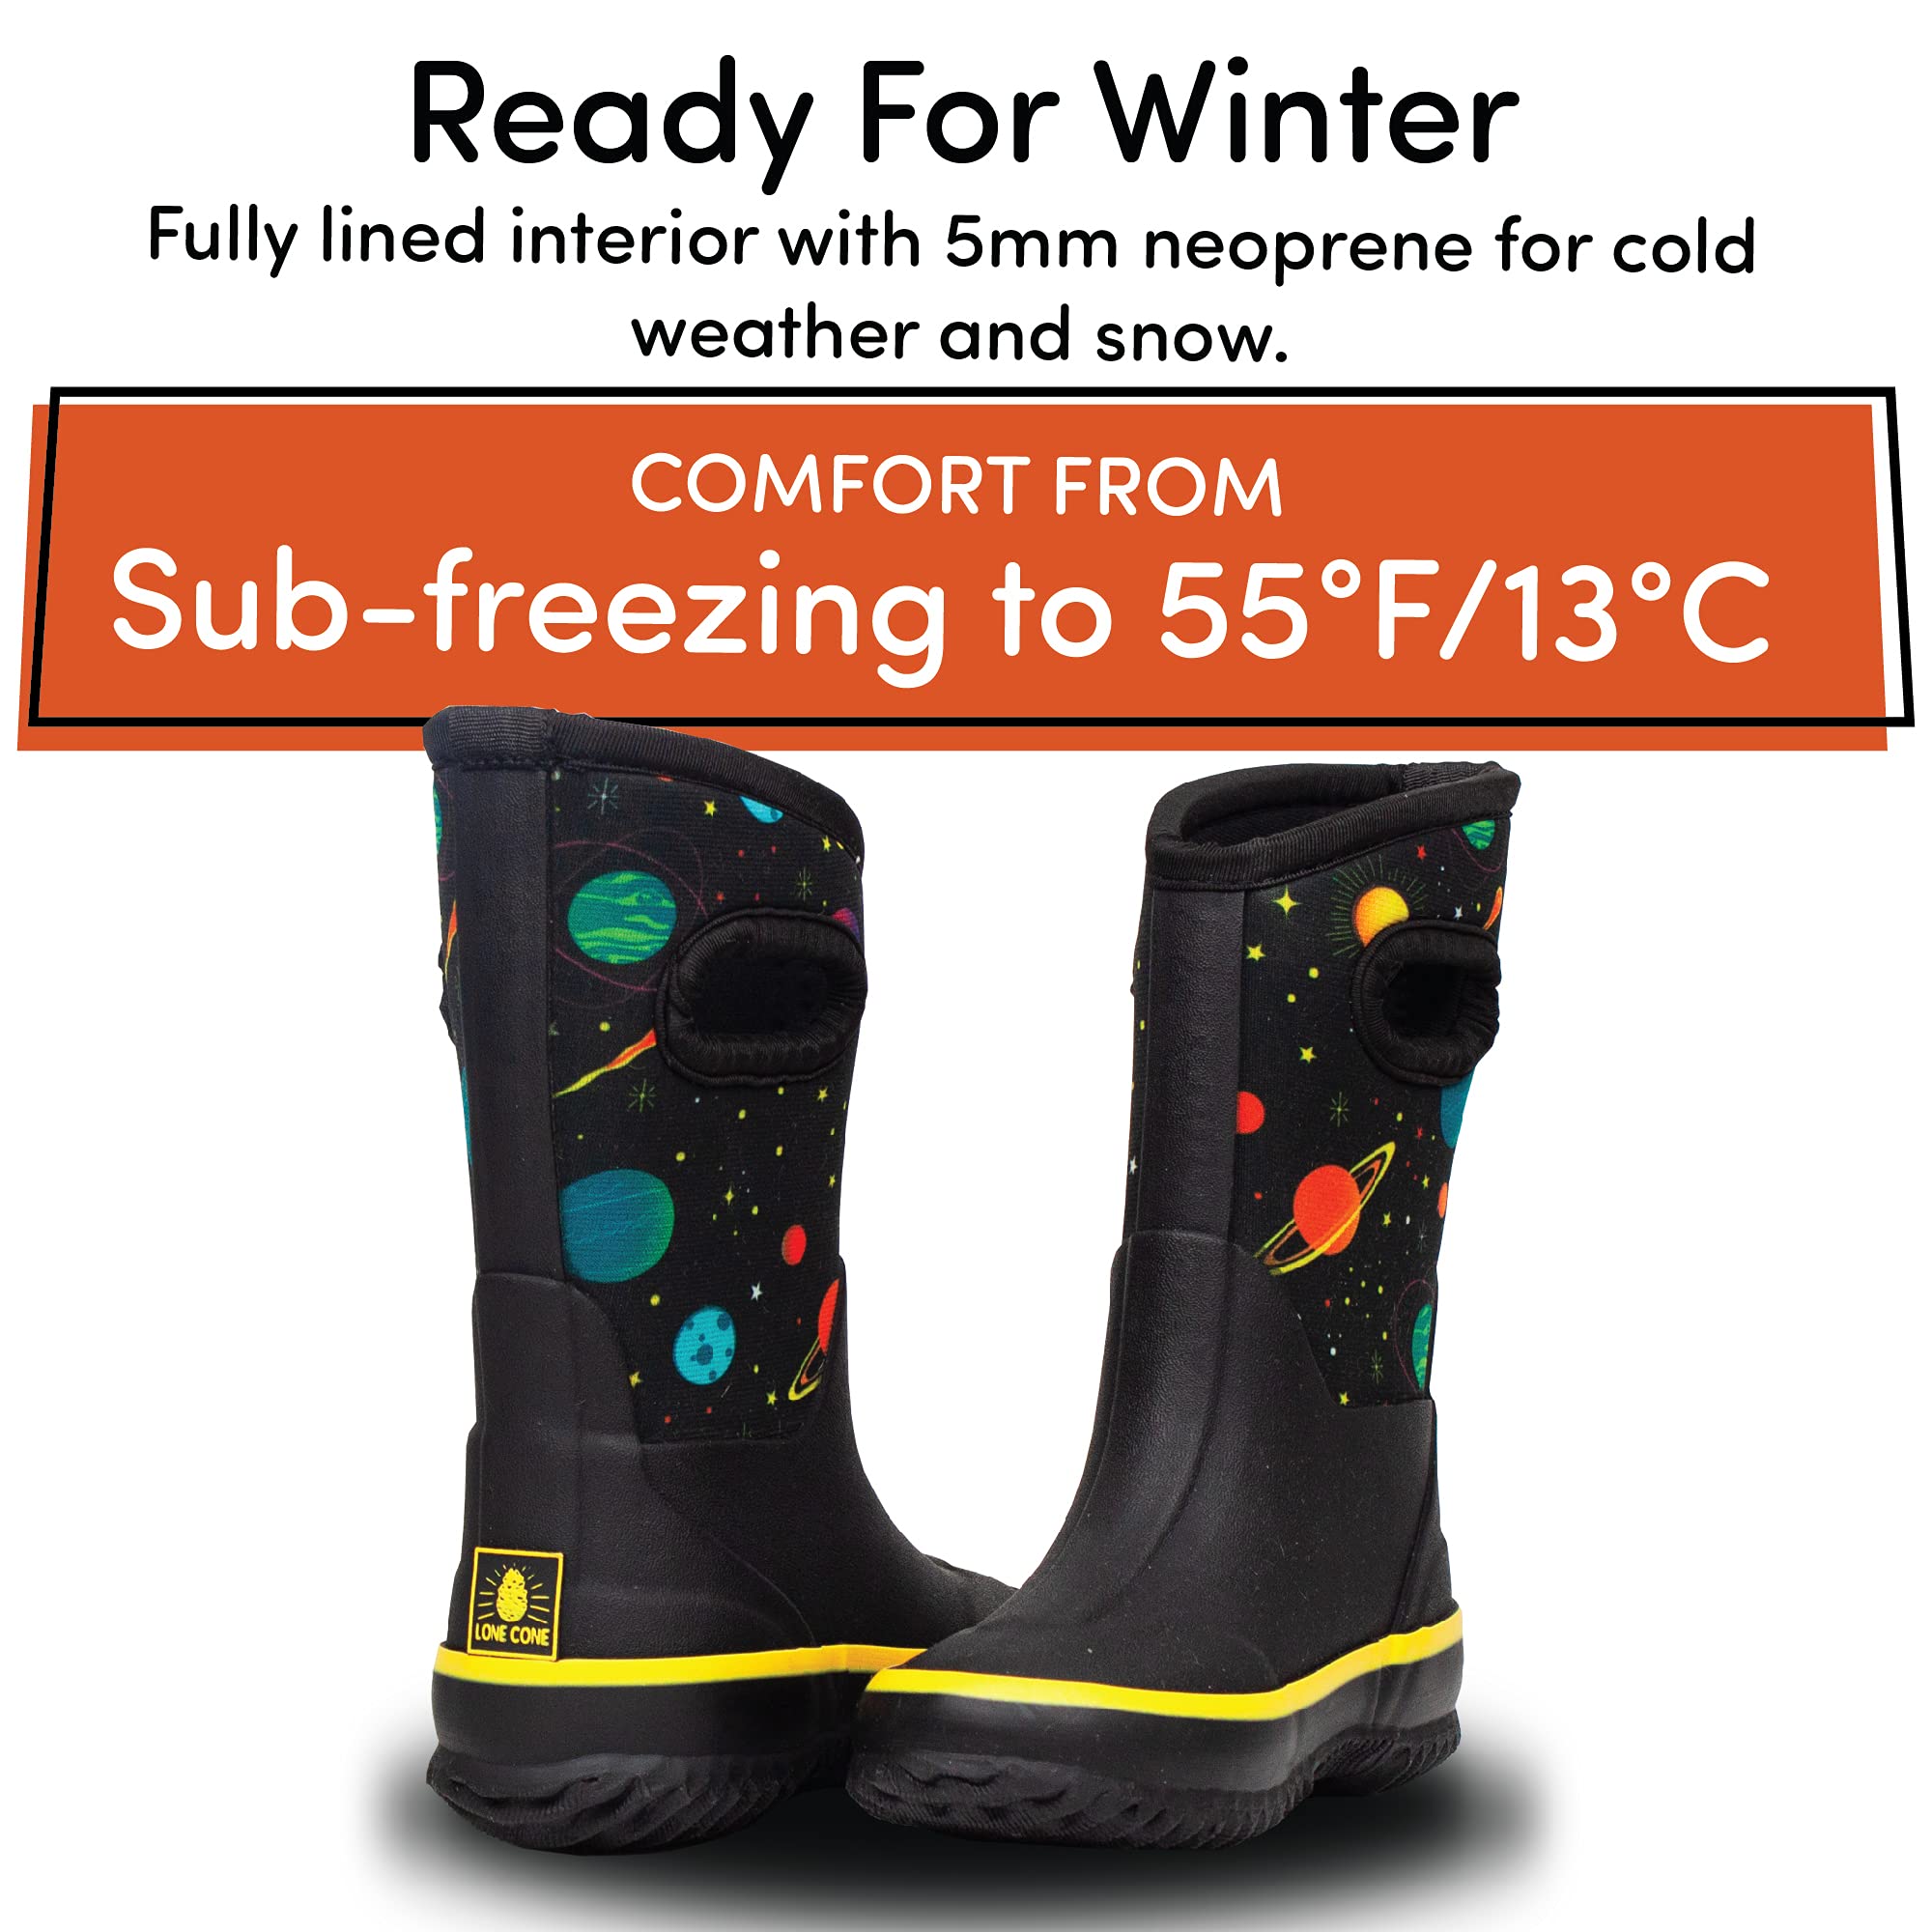 LONECONE Lone Cone Insulating All Weather MudBoots for Toddlers and Kids - Warm Neoprene Boots for Snow, Rain, and Muck